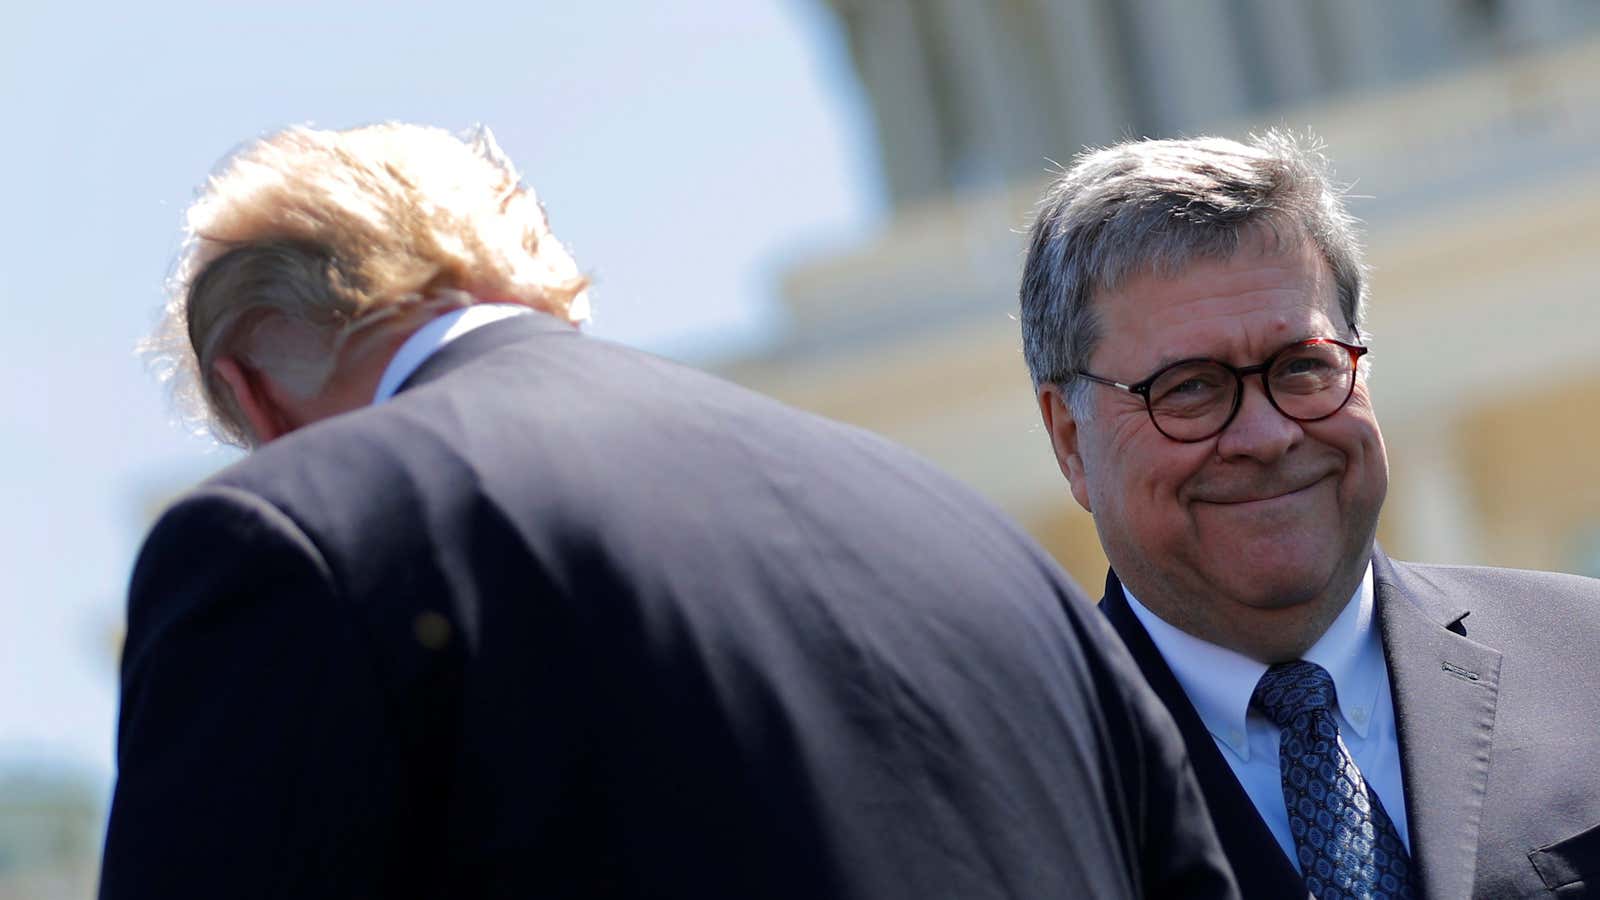 Barr previously oversaw a program under which Haitian refugees were indefinitely detained.